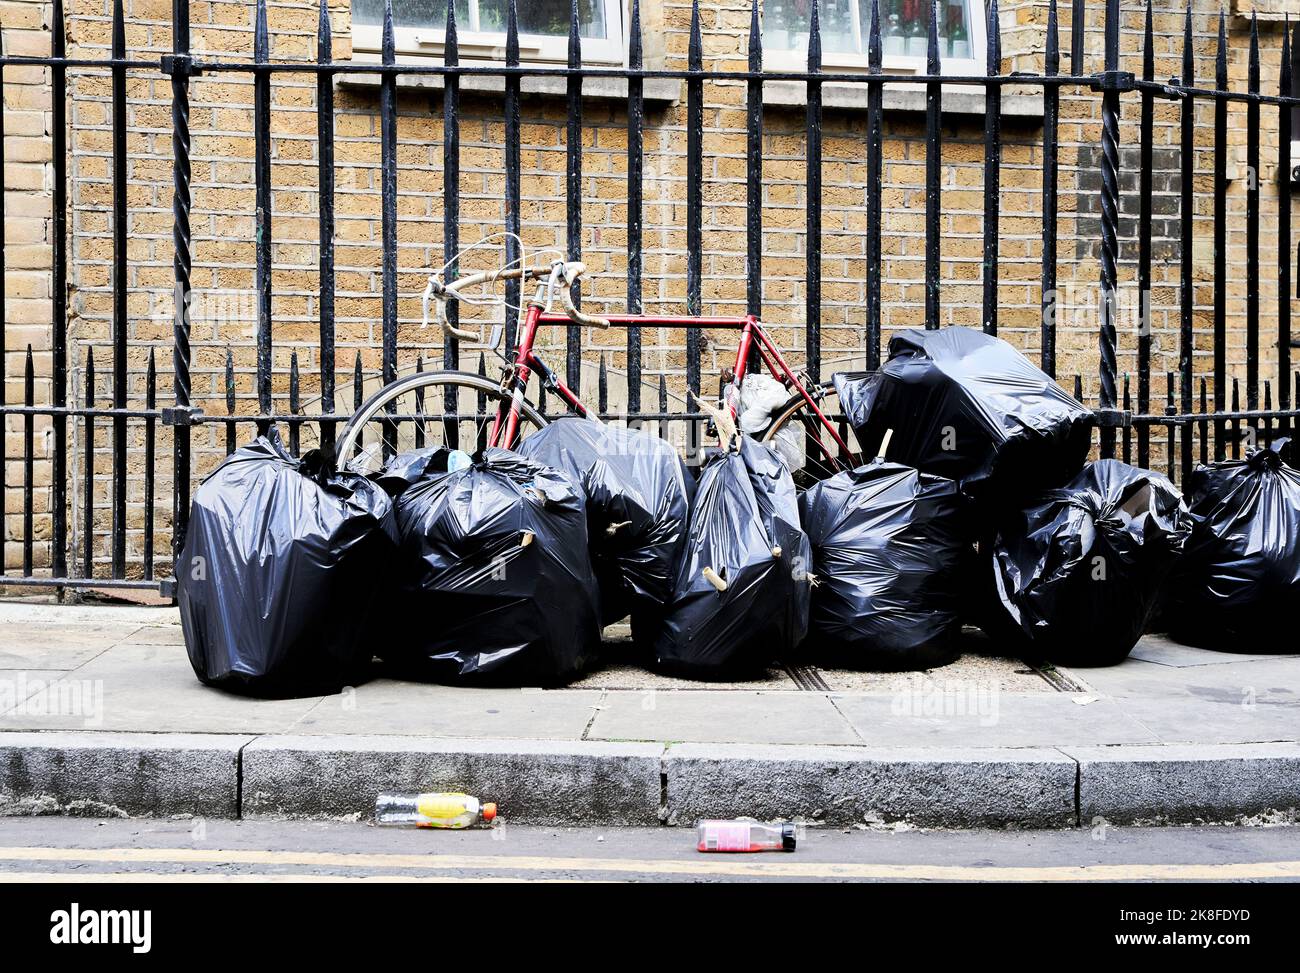 Garbage bags on footpath in city Stock Photo